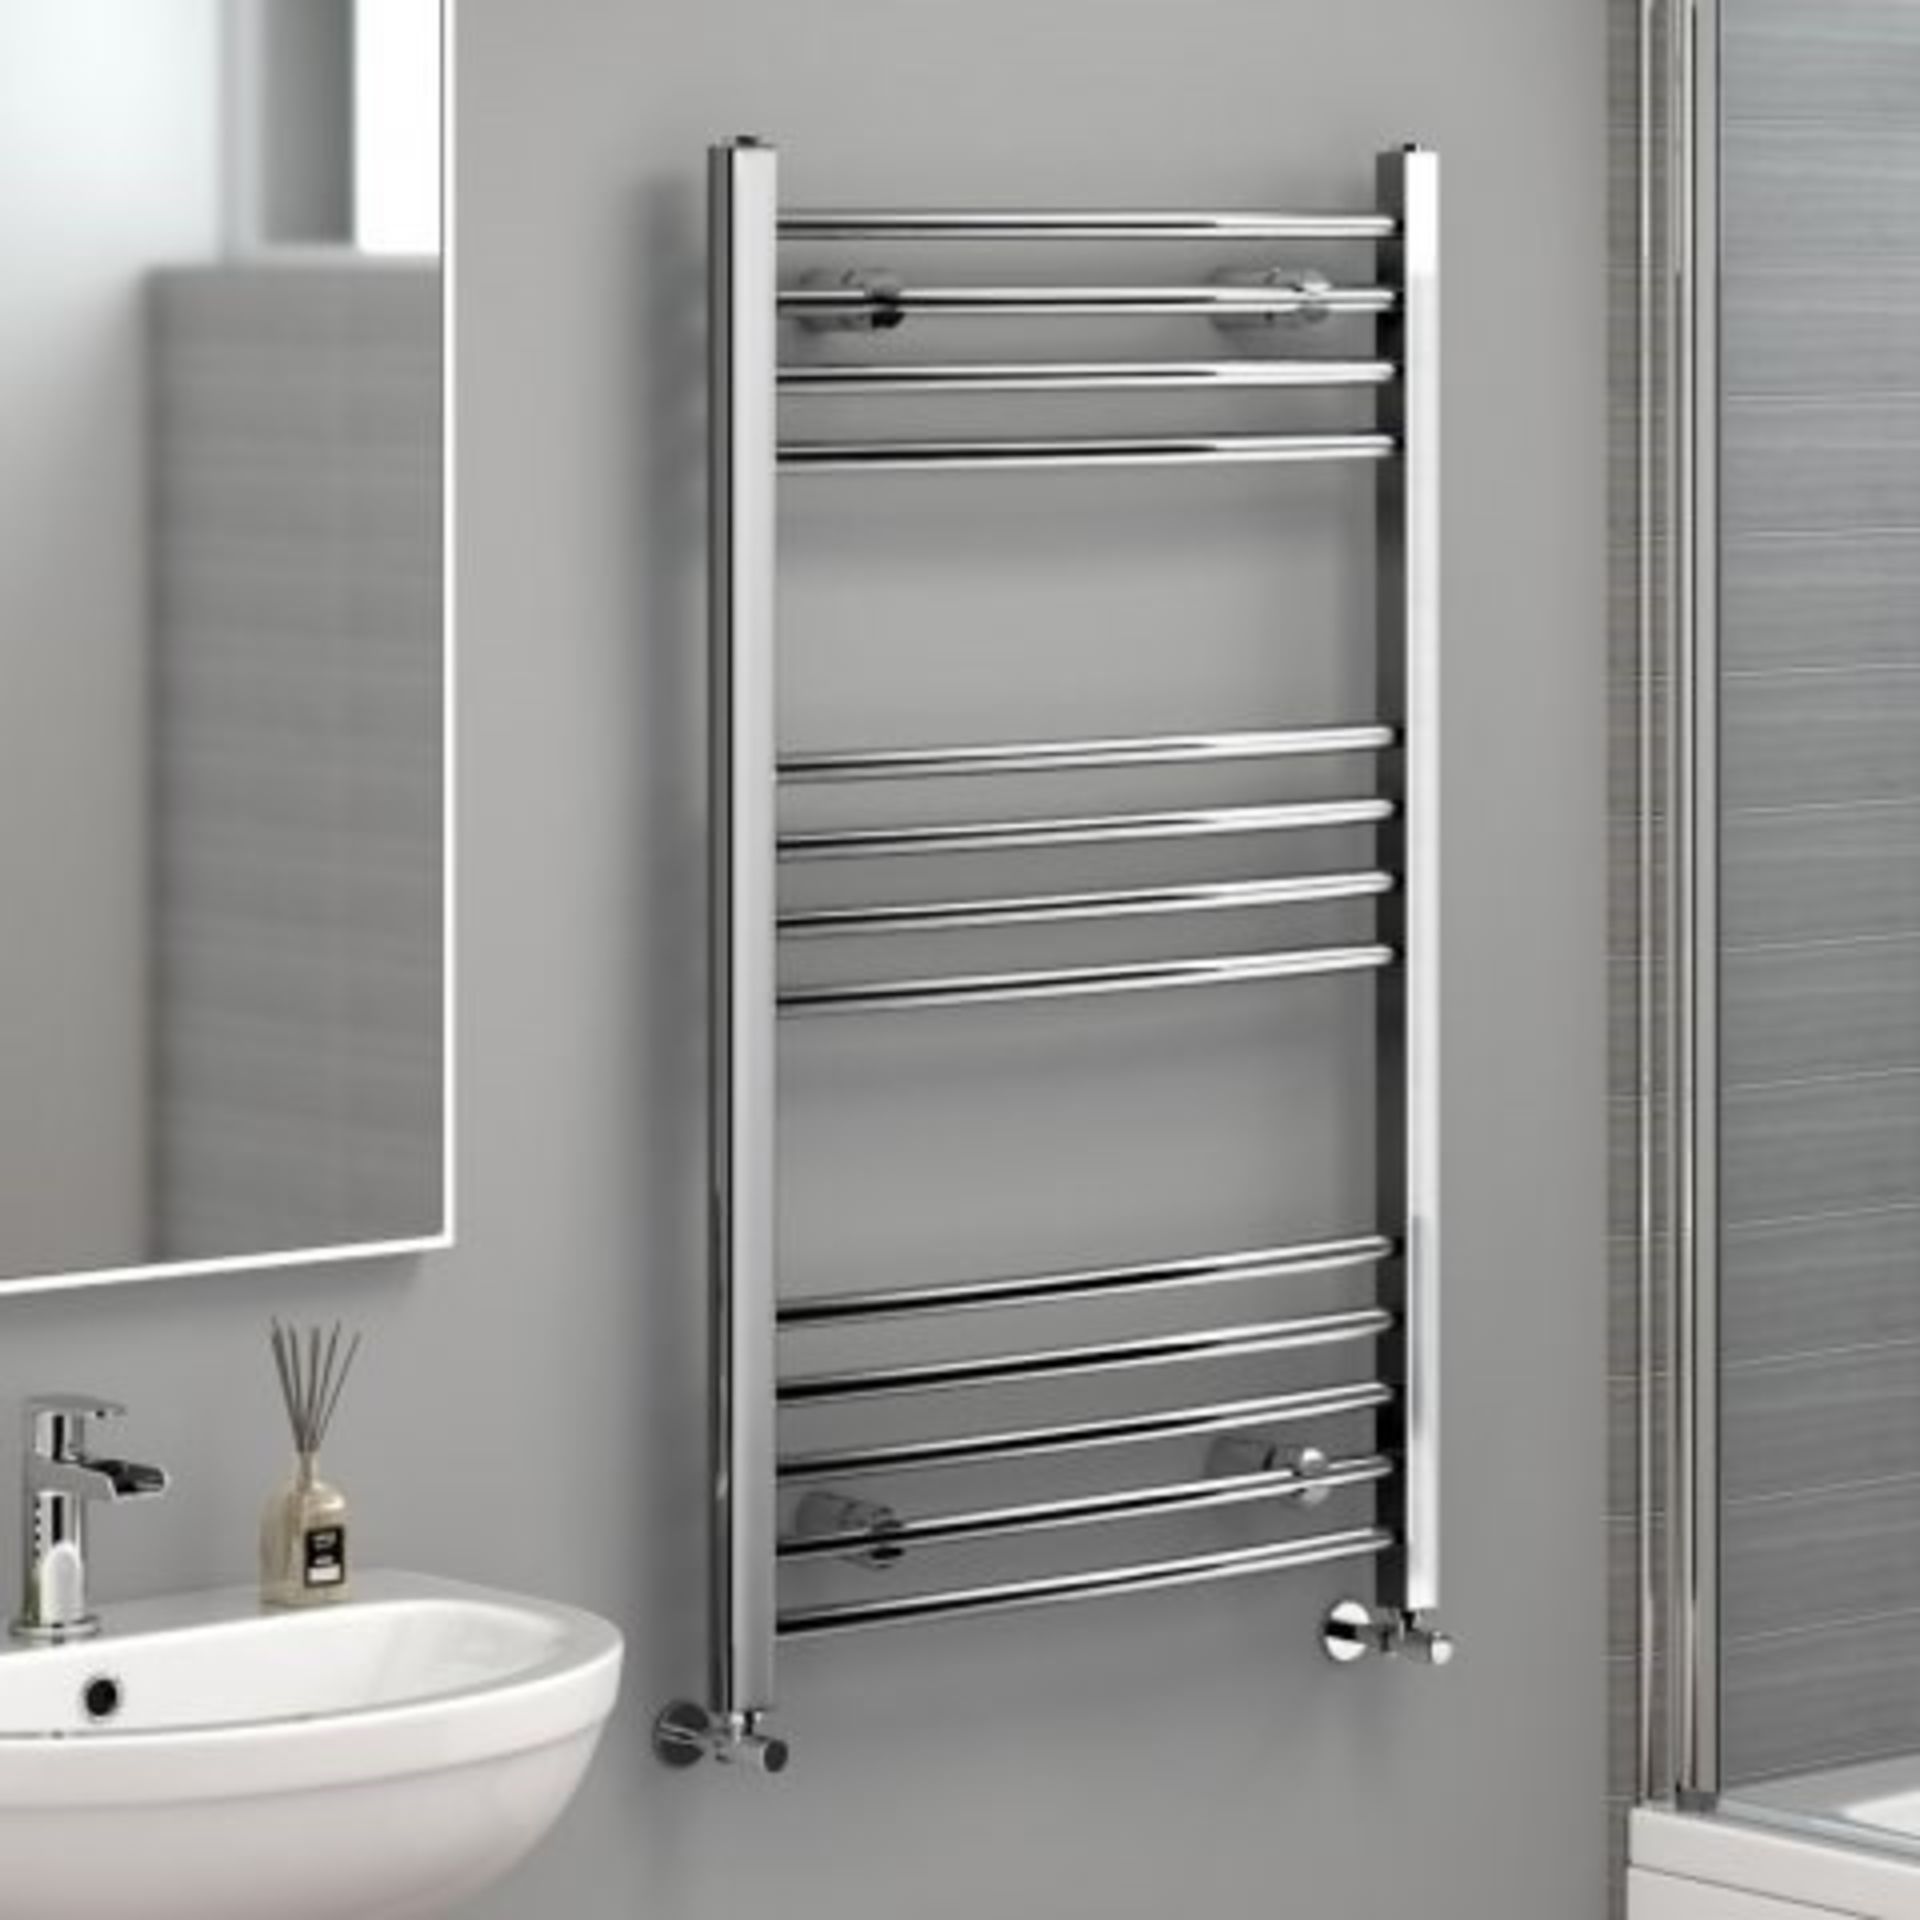 NEW & BOXED 1200x600mm - 20mm Tubes - RRP £219.99.Chrome Curved Rail Ladder Towel Radiator. O... - Image 3 of 3